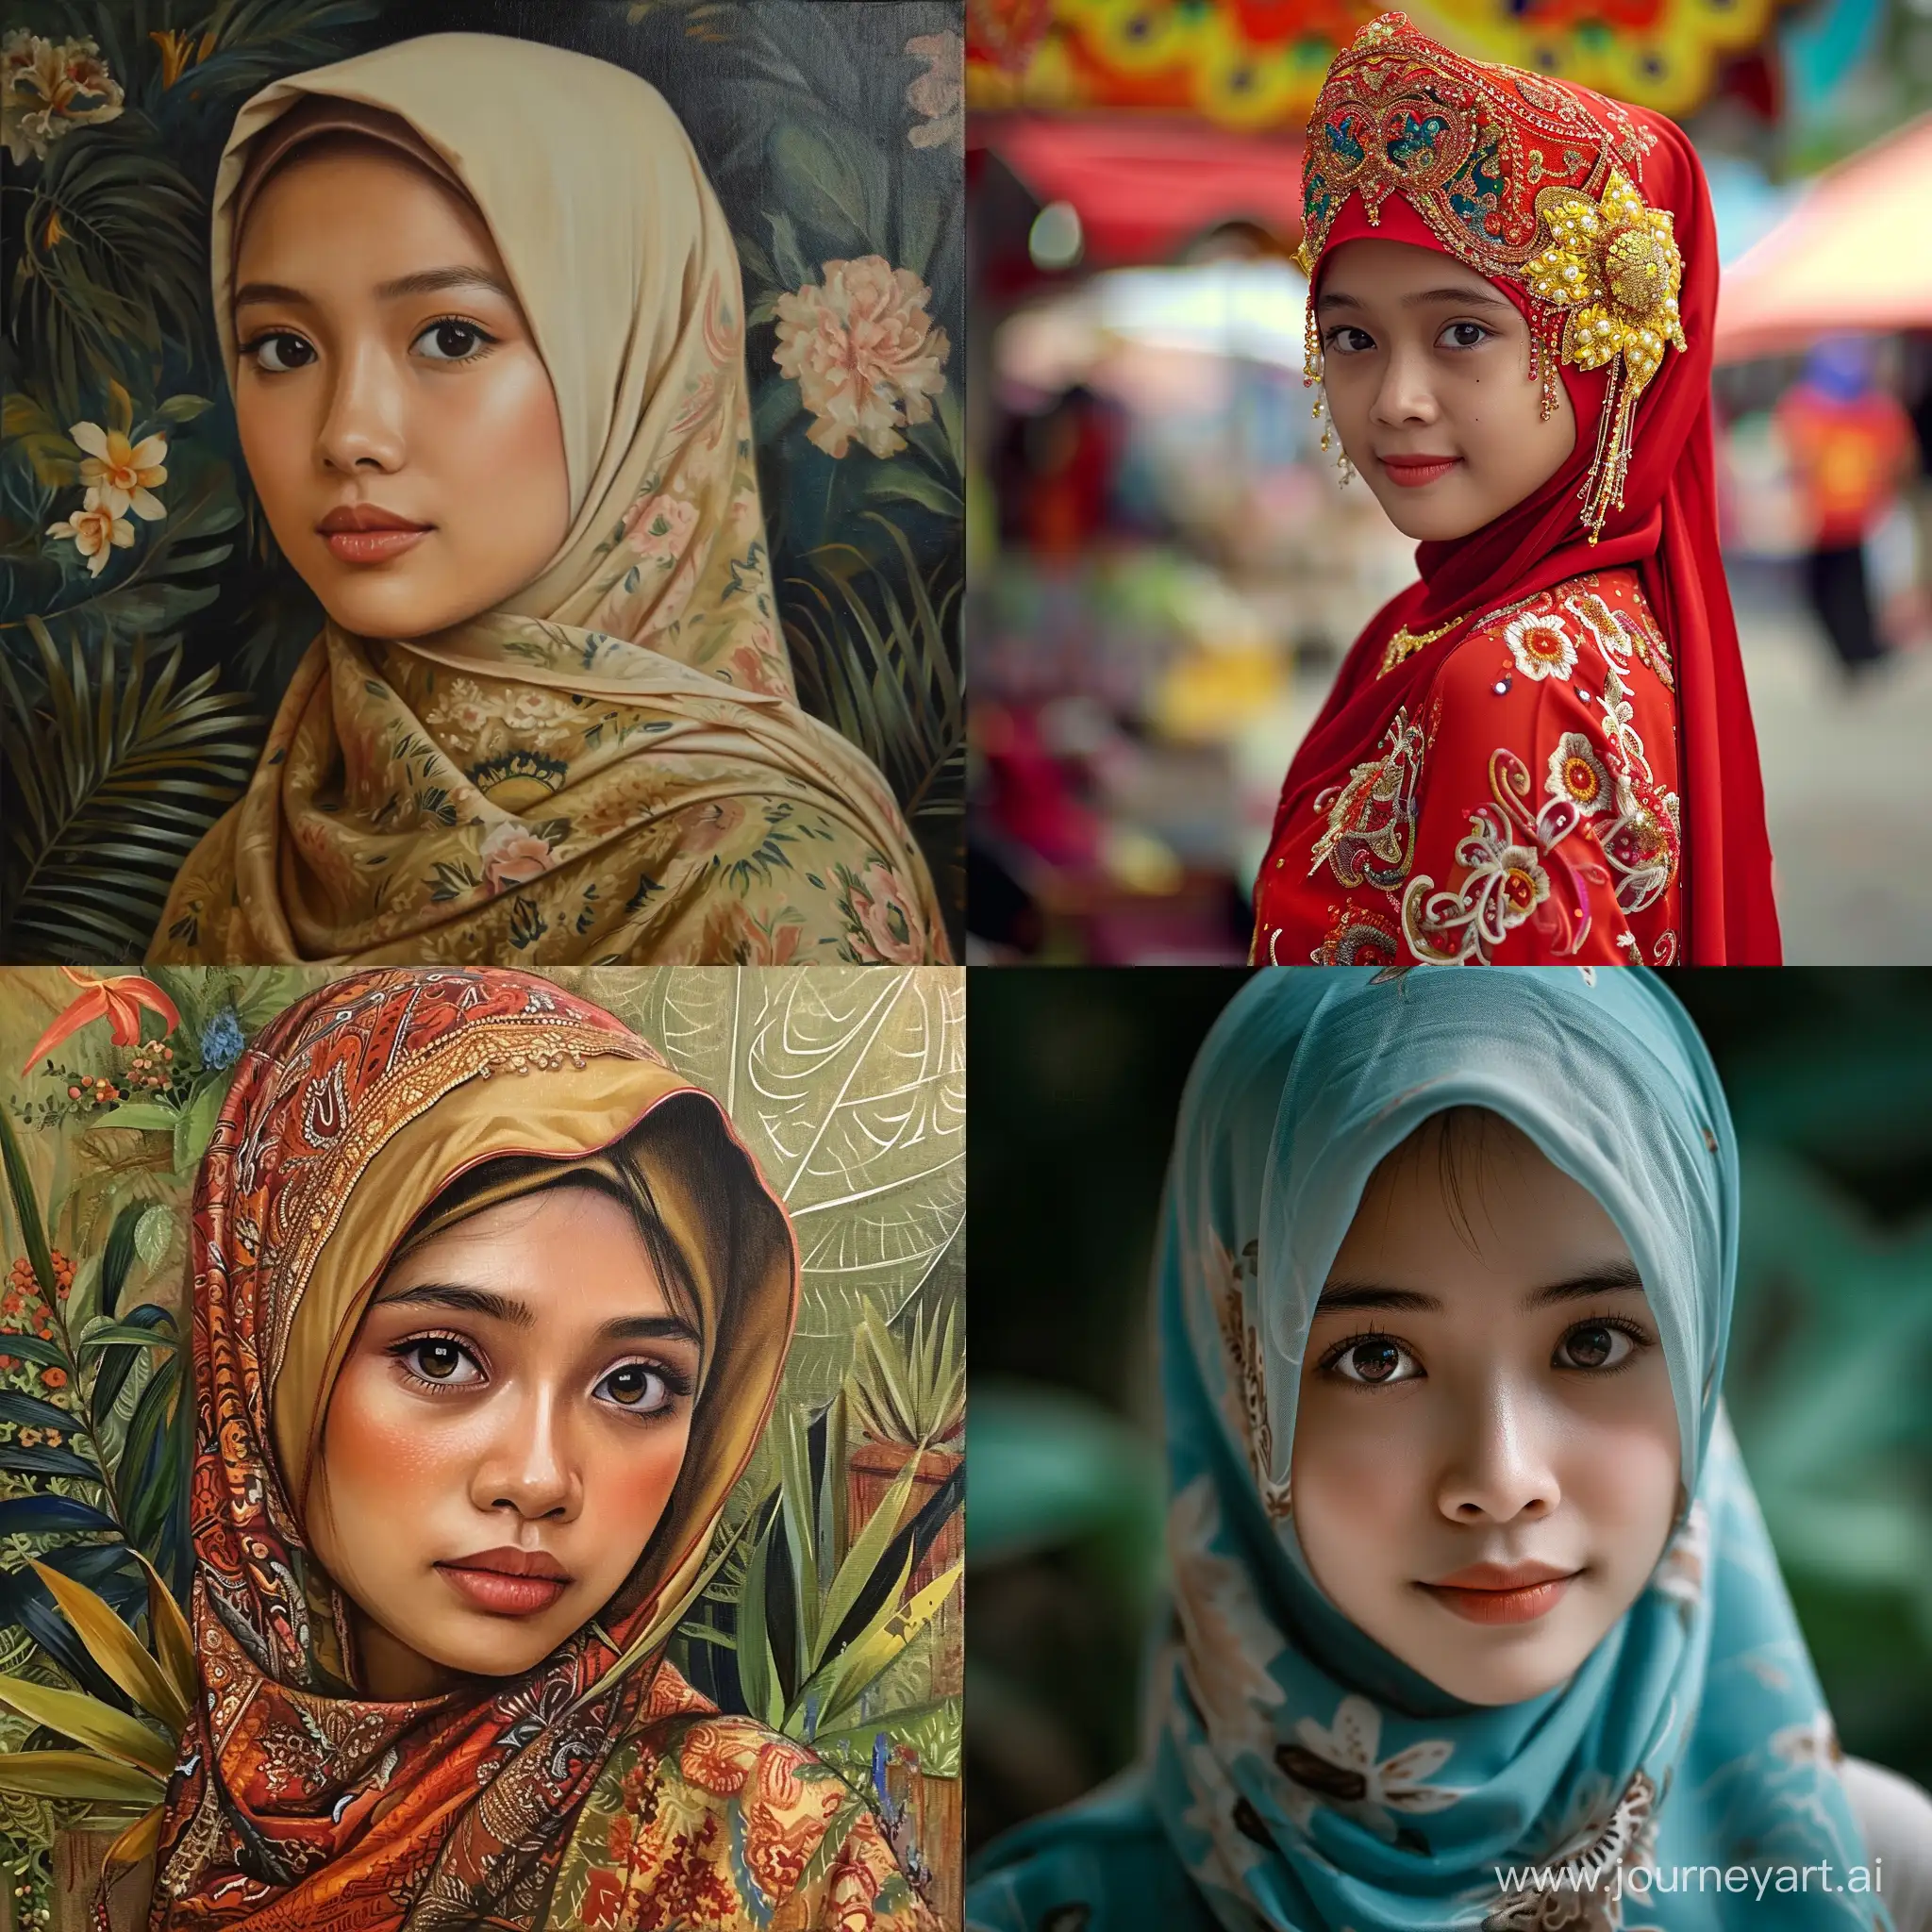 Malay-Girl-in-Traditional-Attire-Gazing-Serenely-Cultural-Portrait-Art